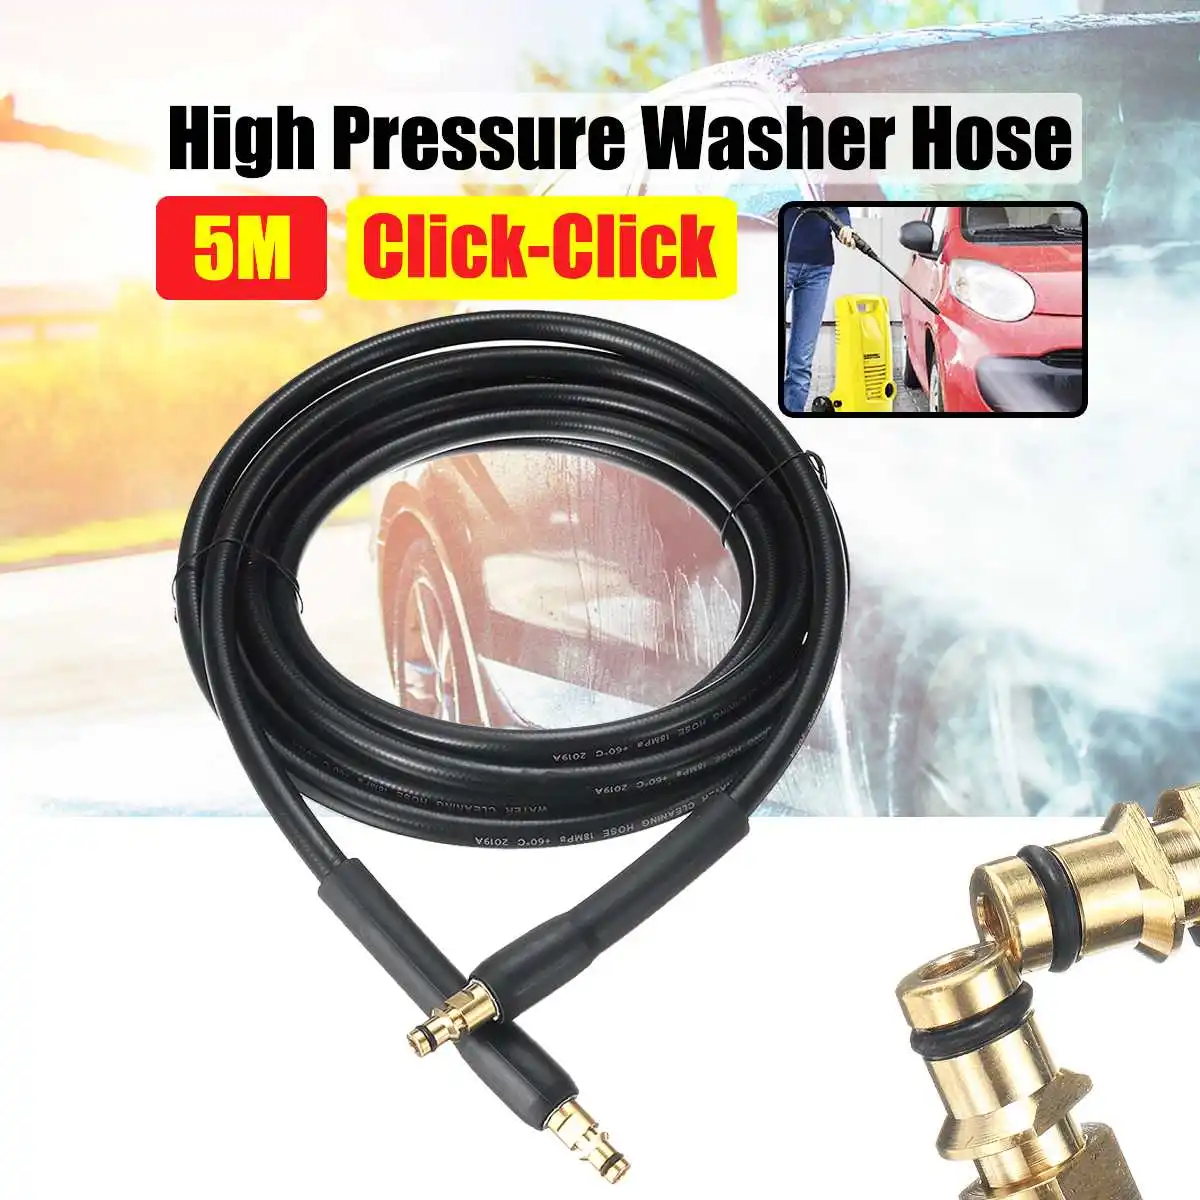 5M High Pressure Washer Replacement Pipe Cleaning Hose For Karcher K1 K2 Cleaner 